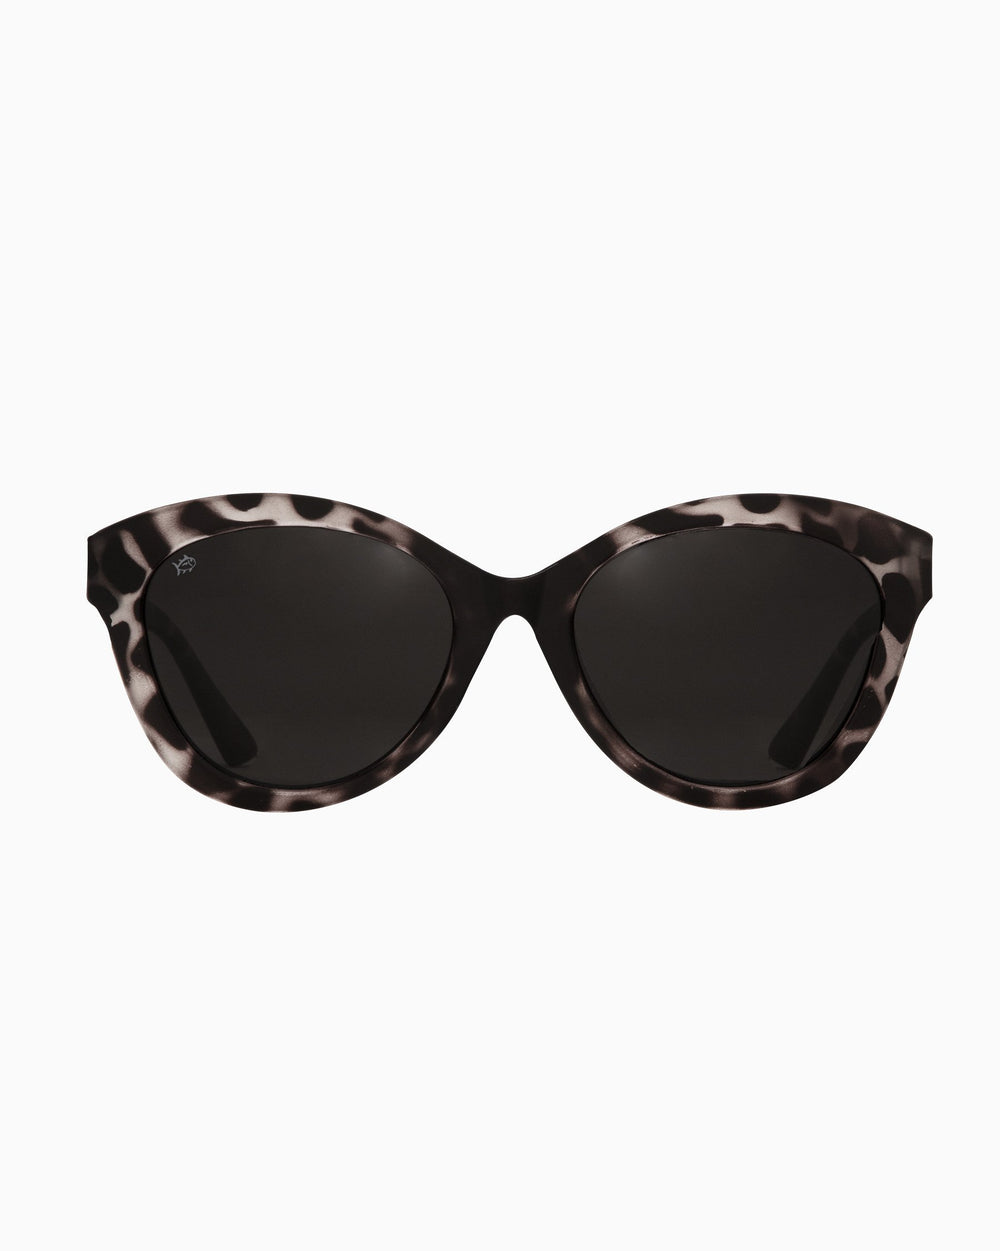 The front of the Women's Rheos Faris Sunglasses by Southern Tide - Black Tortoise Gunmetal